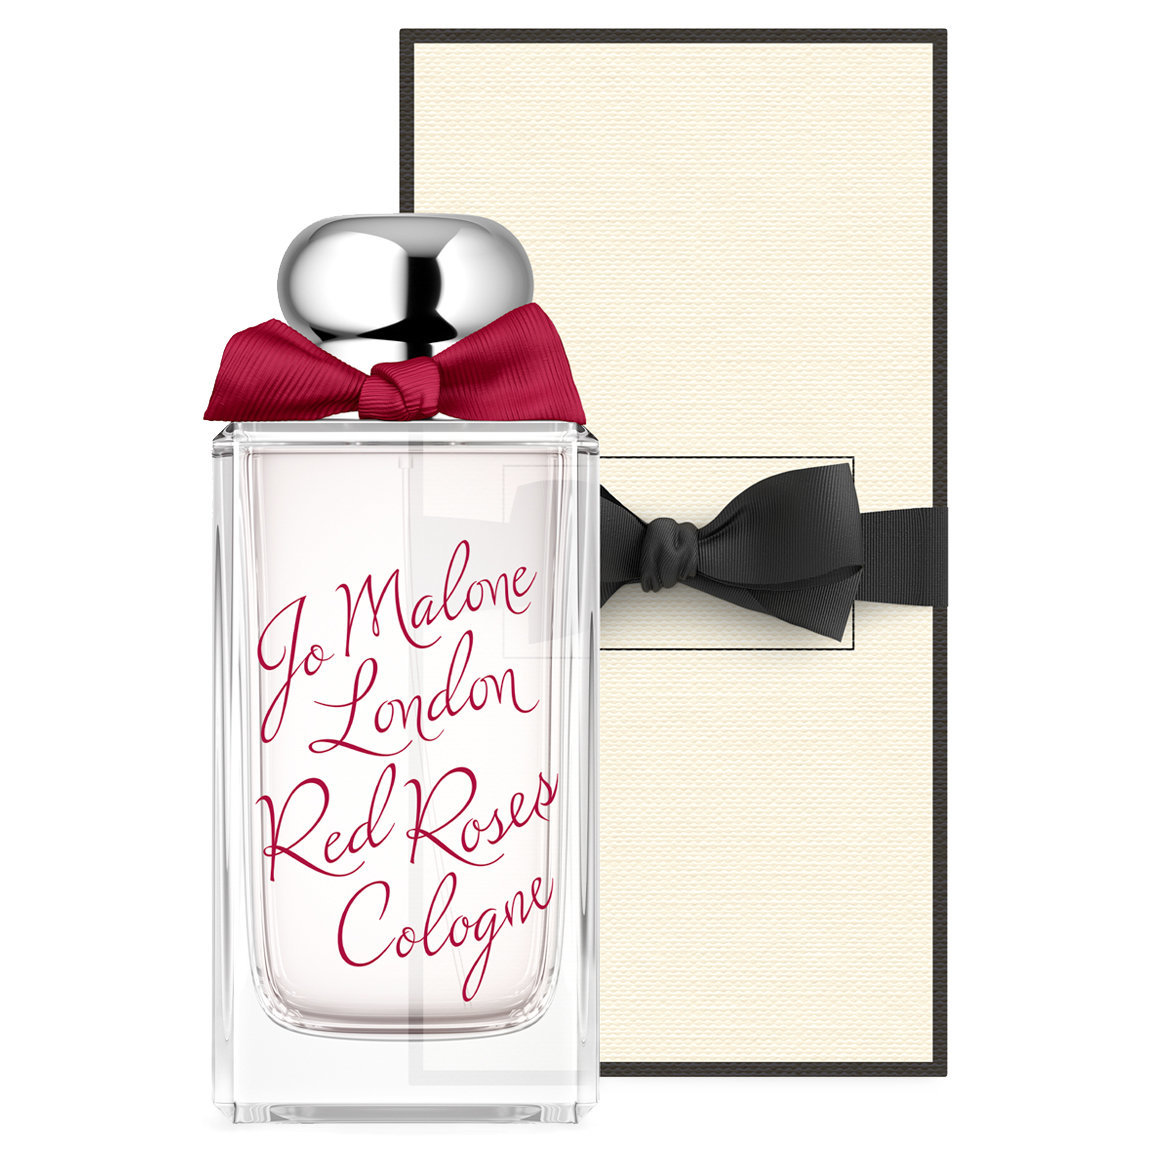 Jo Malone London Red Roses Cologne Limited Edition 100 ml alternative view 1 - product swatch.